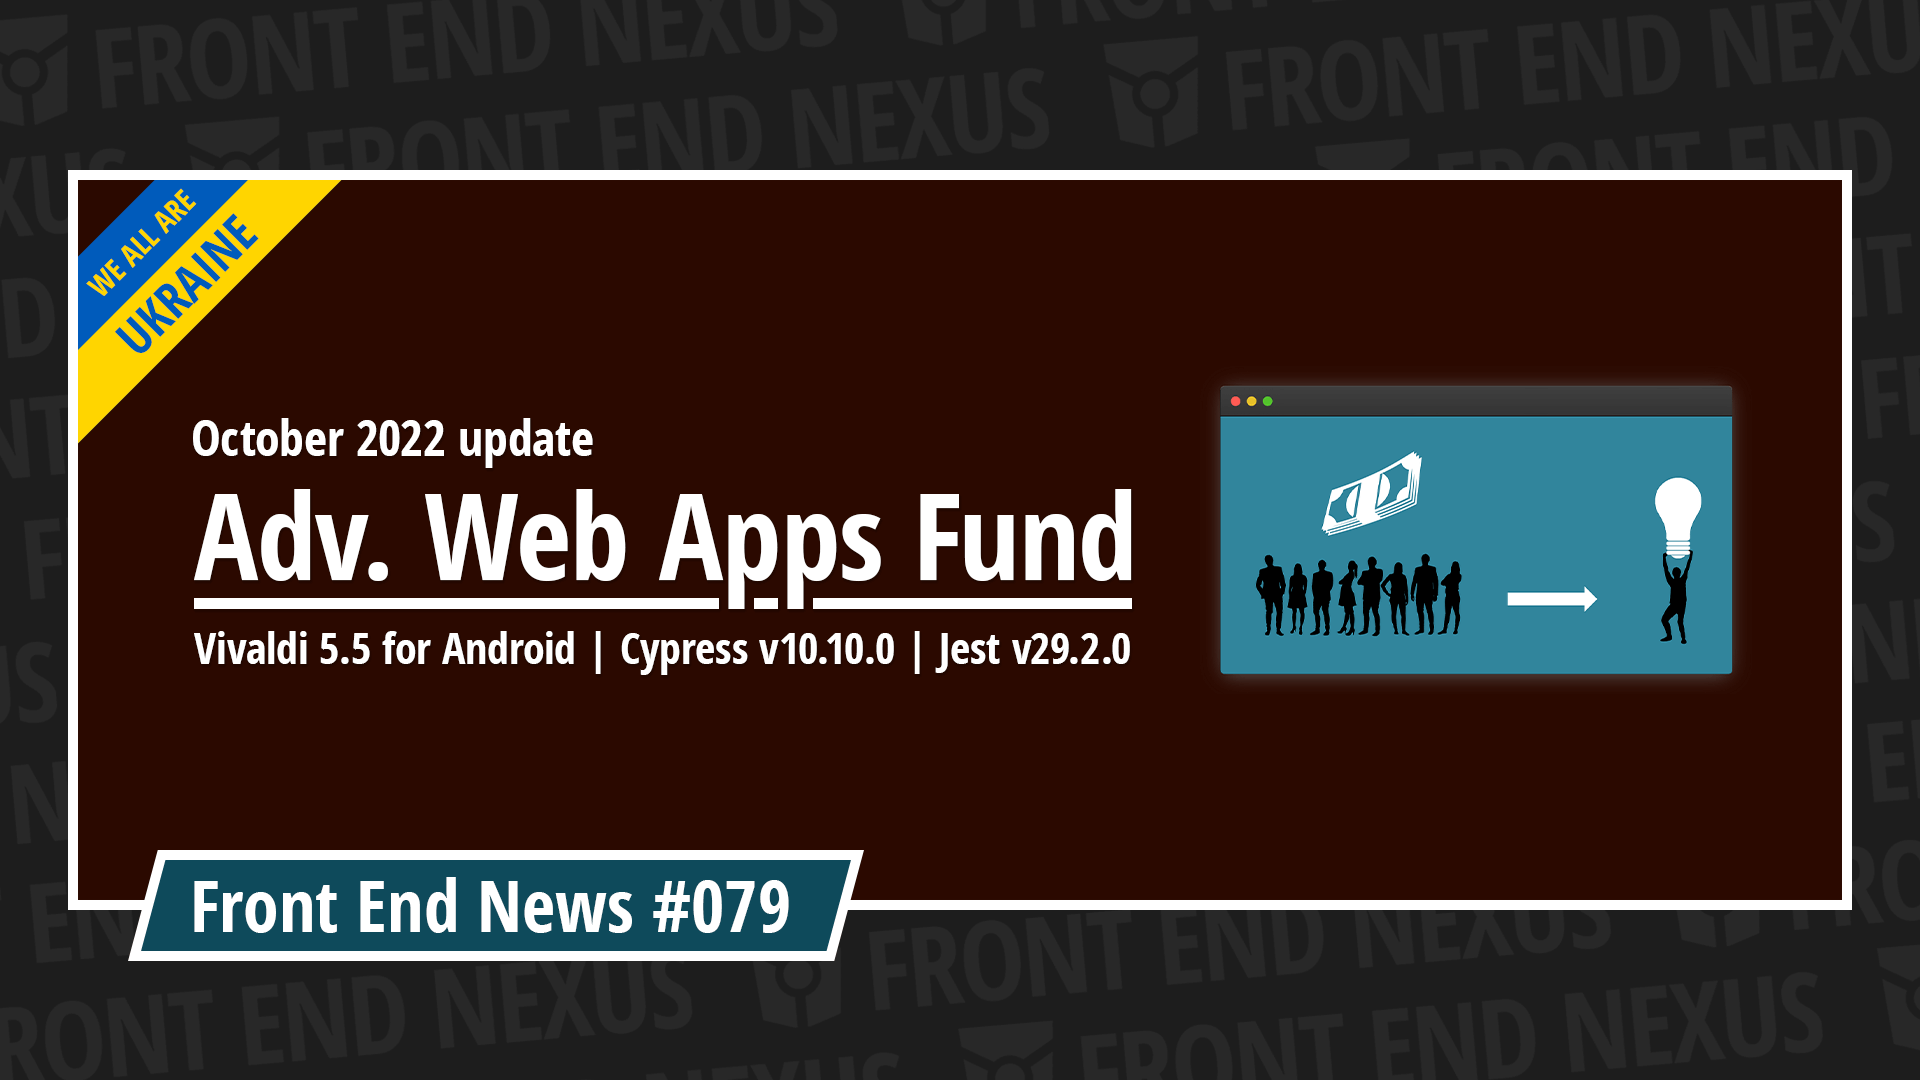 Advanced Web Apps Fund October 2022 update, Vivaldi 5.5 for Android, Cypress v10.10.0, Jest v29.2.0, and more | Front End News #079